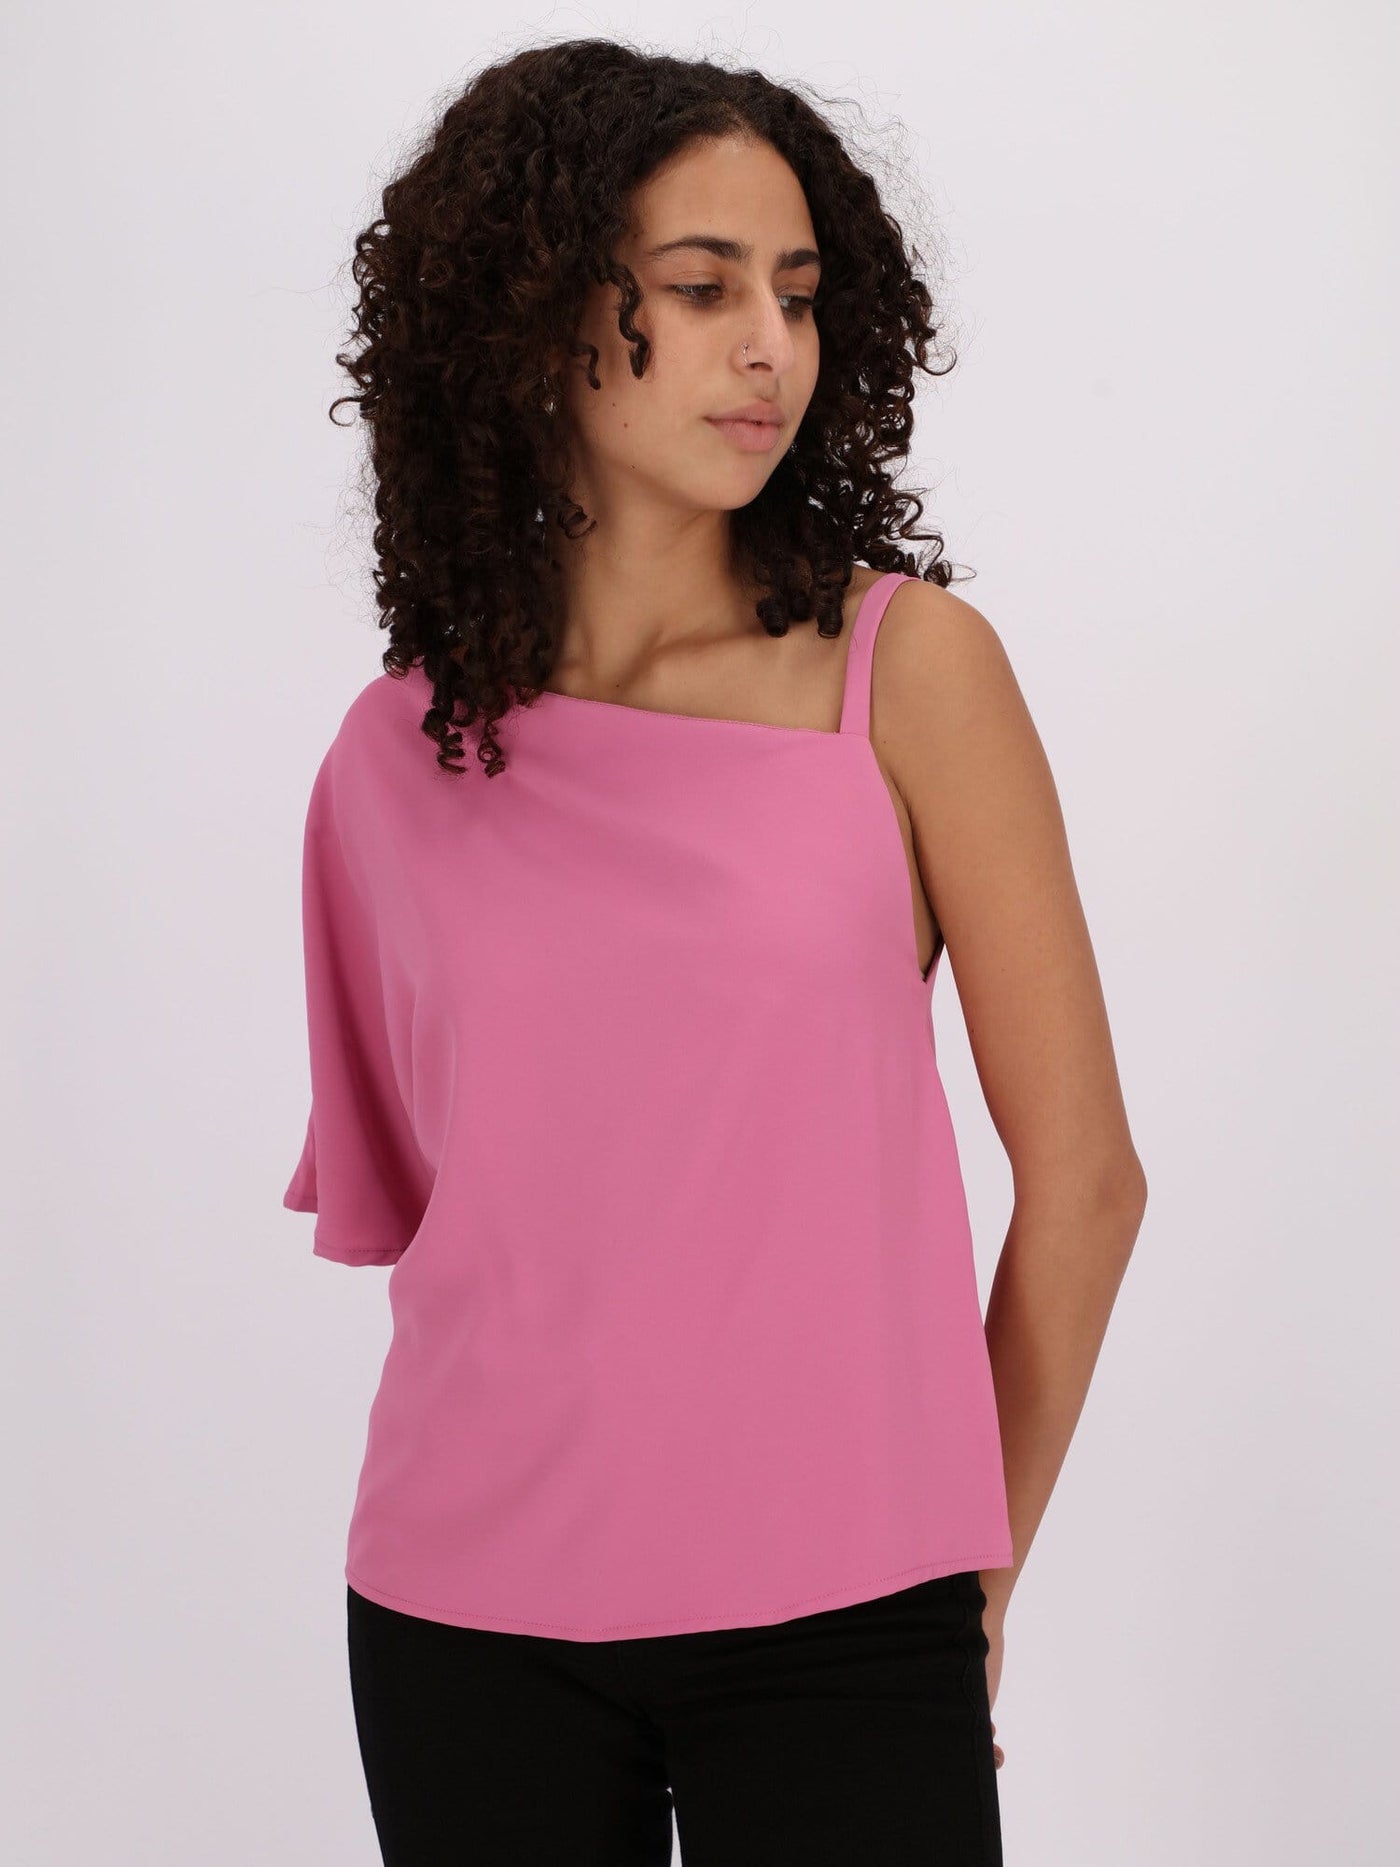 OR Tops & Blouses Neon Fuchsia / S Short Sleeve Top with One Strap